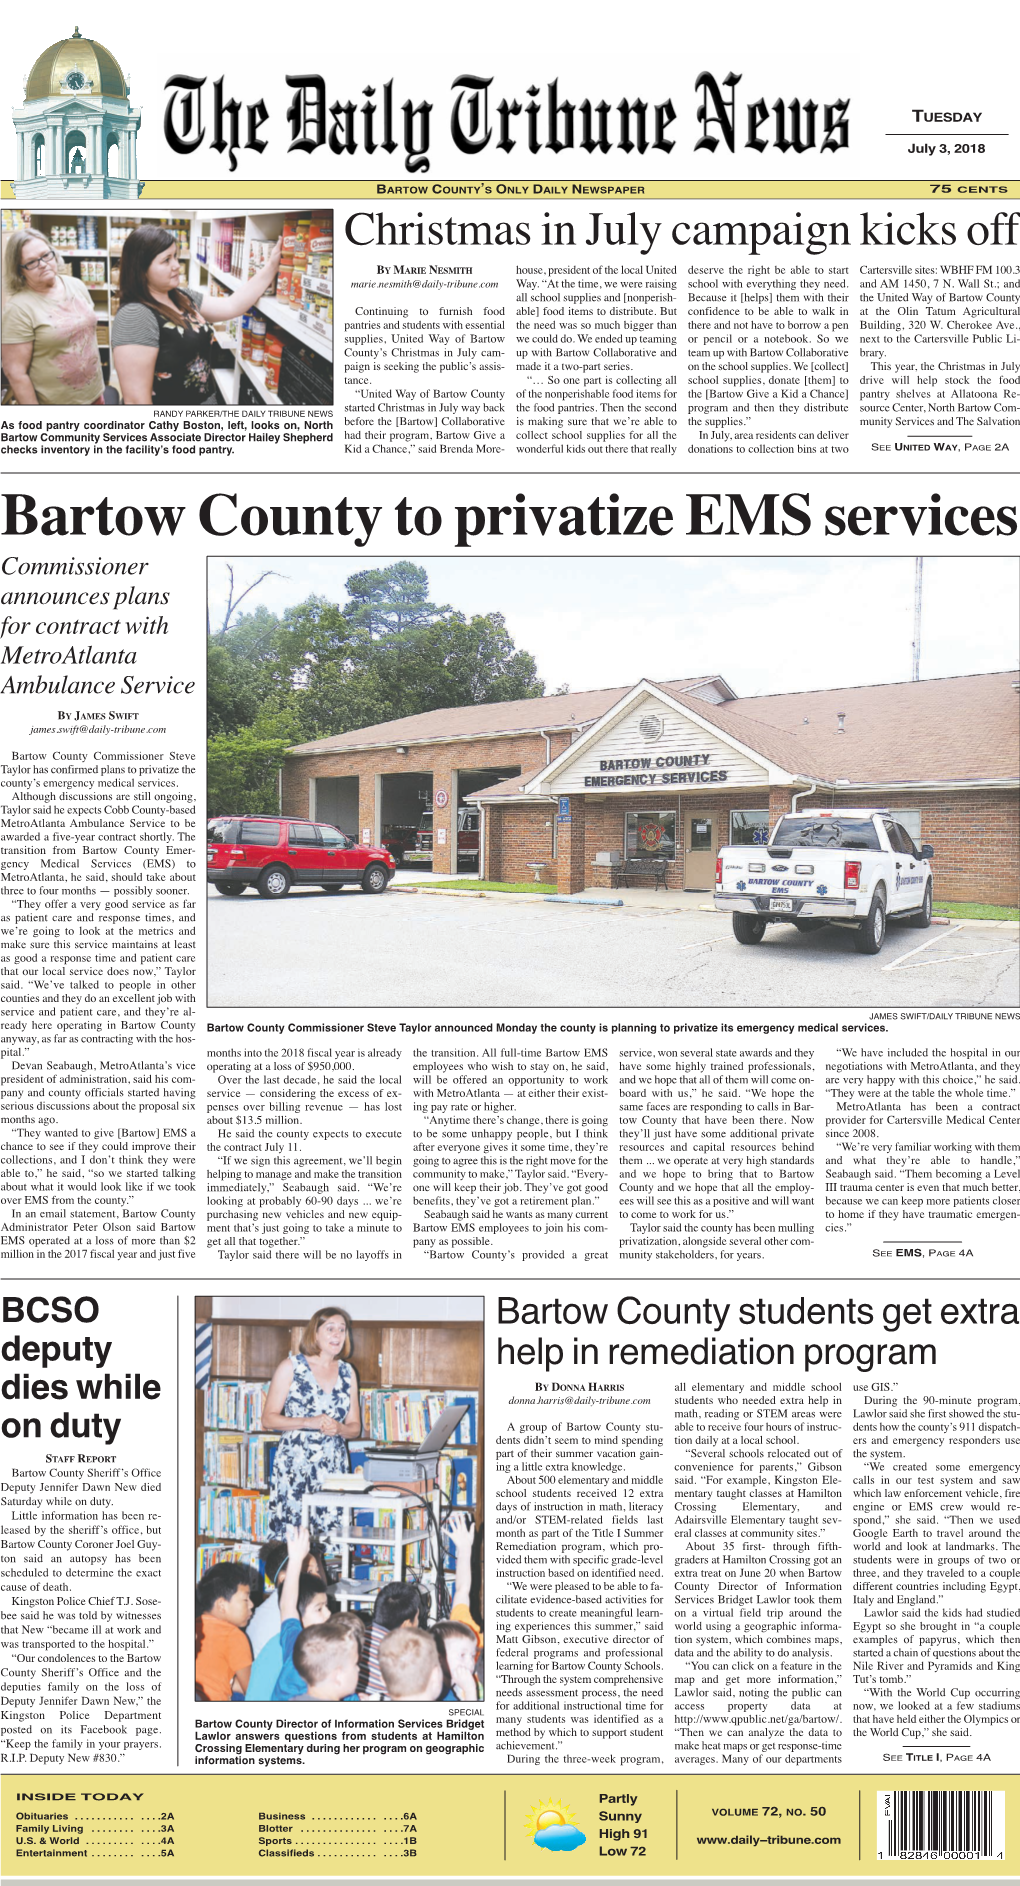 Bartow County to Privatize EMS Services Commissioner Announces Plans for Contract with Metroatlanta Ambulance Service